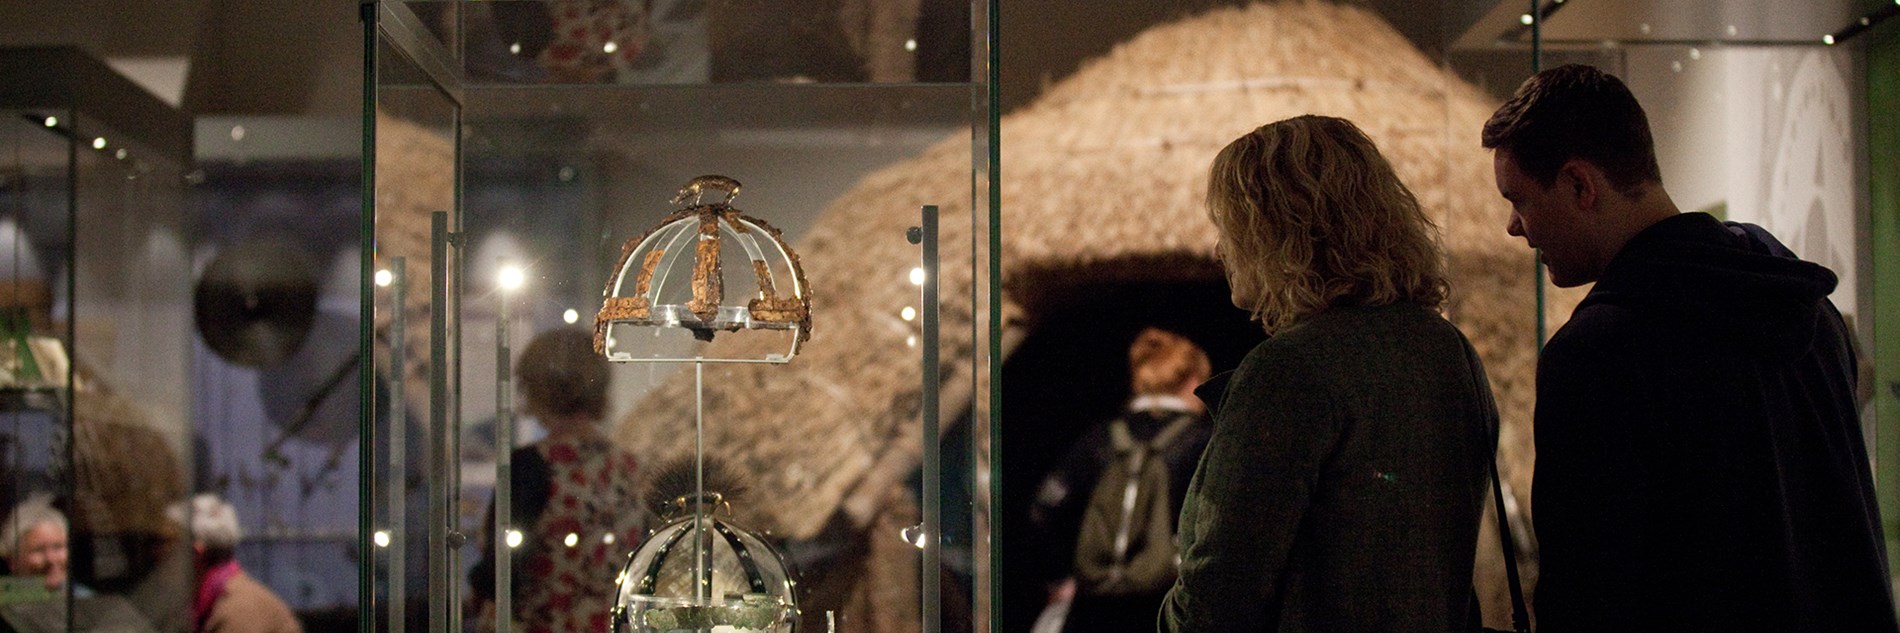 The Beneath Your Feet gallery, with two people looking at the remains of an Anglo-Saxon boar-crested helmet and a roundhouse in the background.